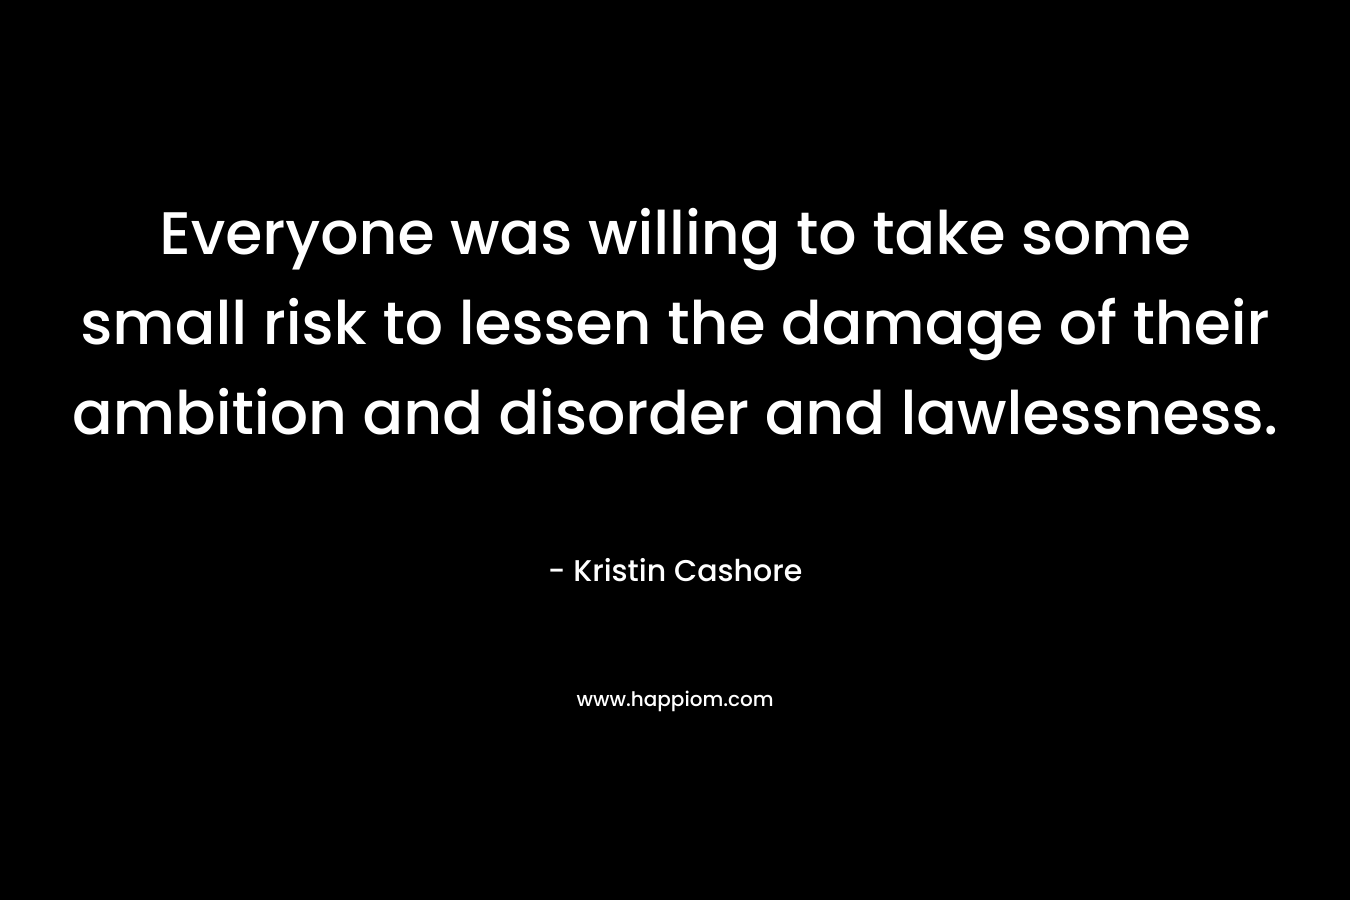 Everyone was willing to take some small risk to lessen the damage of their ambition and disorder and lawlessness. – Kristin Cashore